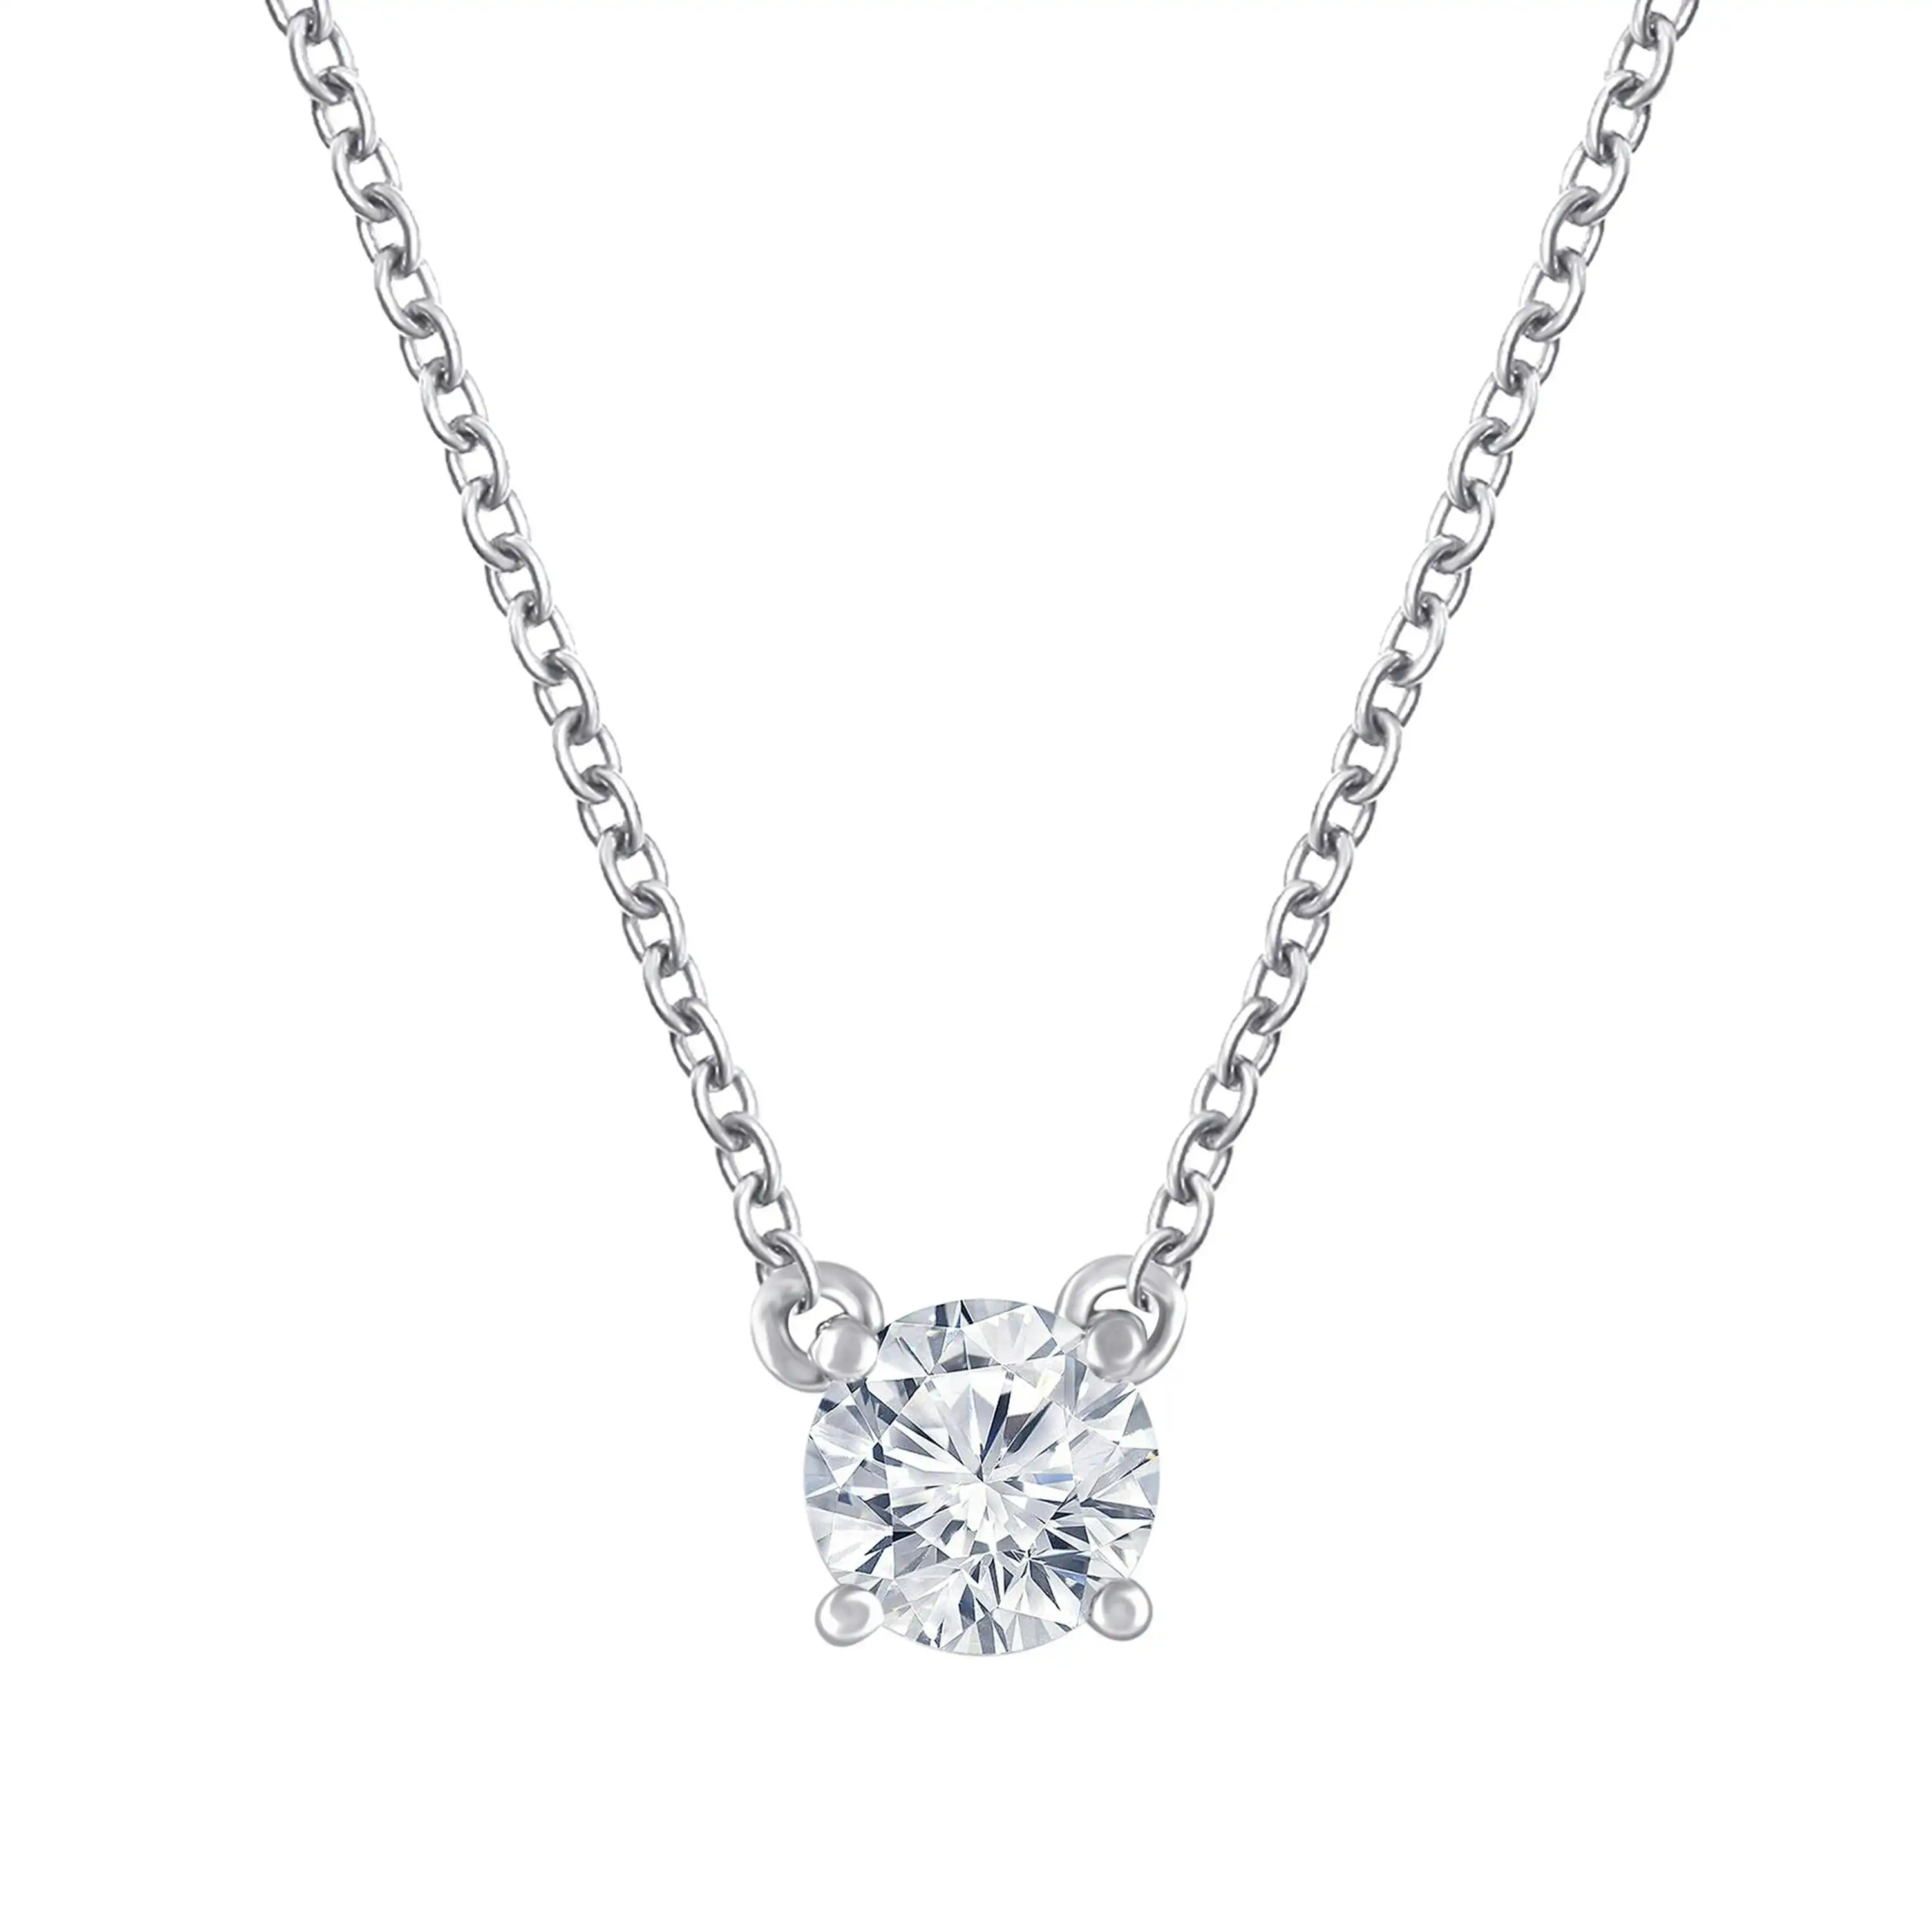 Meera 1/2ct Laboratory Grown Diamond Solitaire Necklace in 9ct White Gold